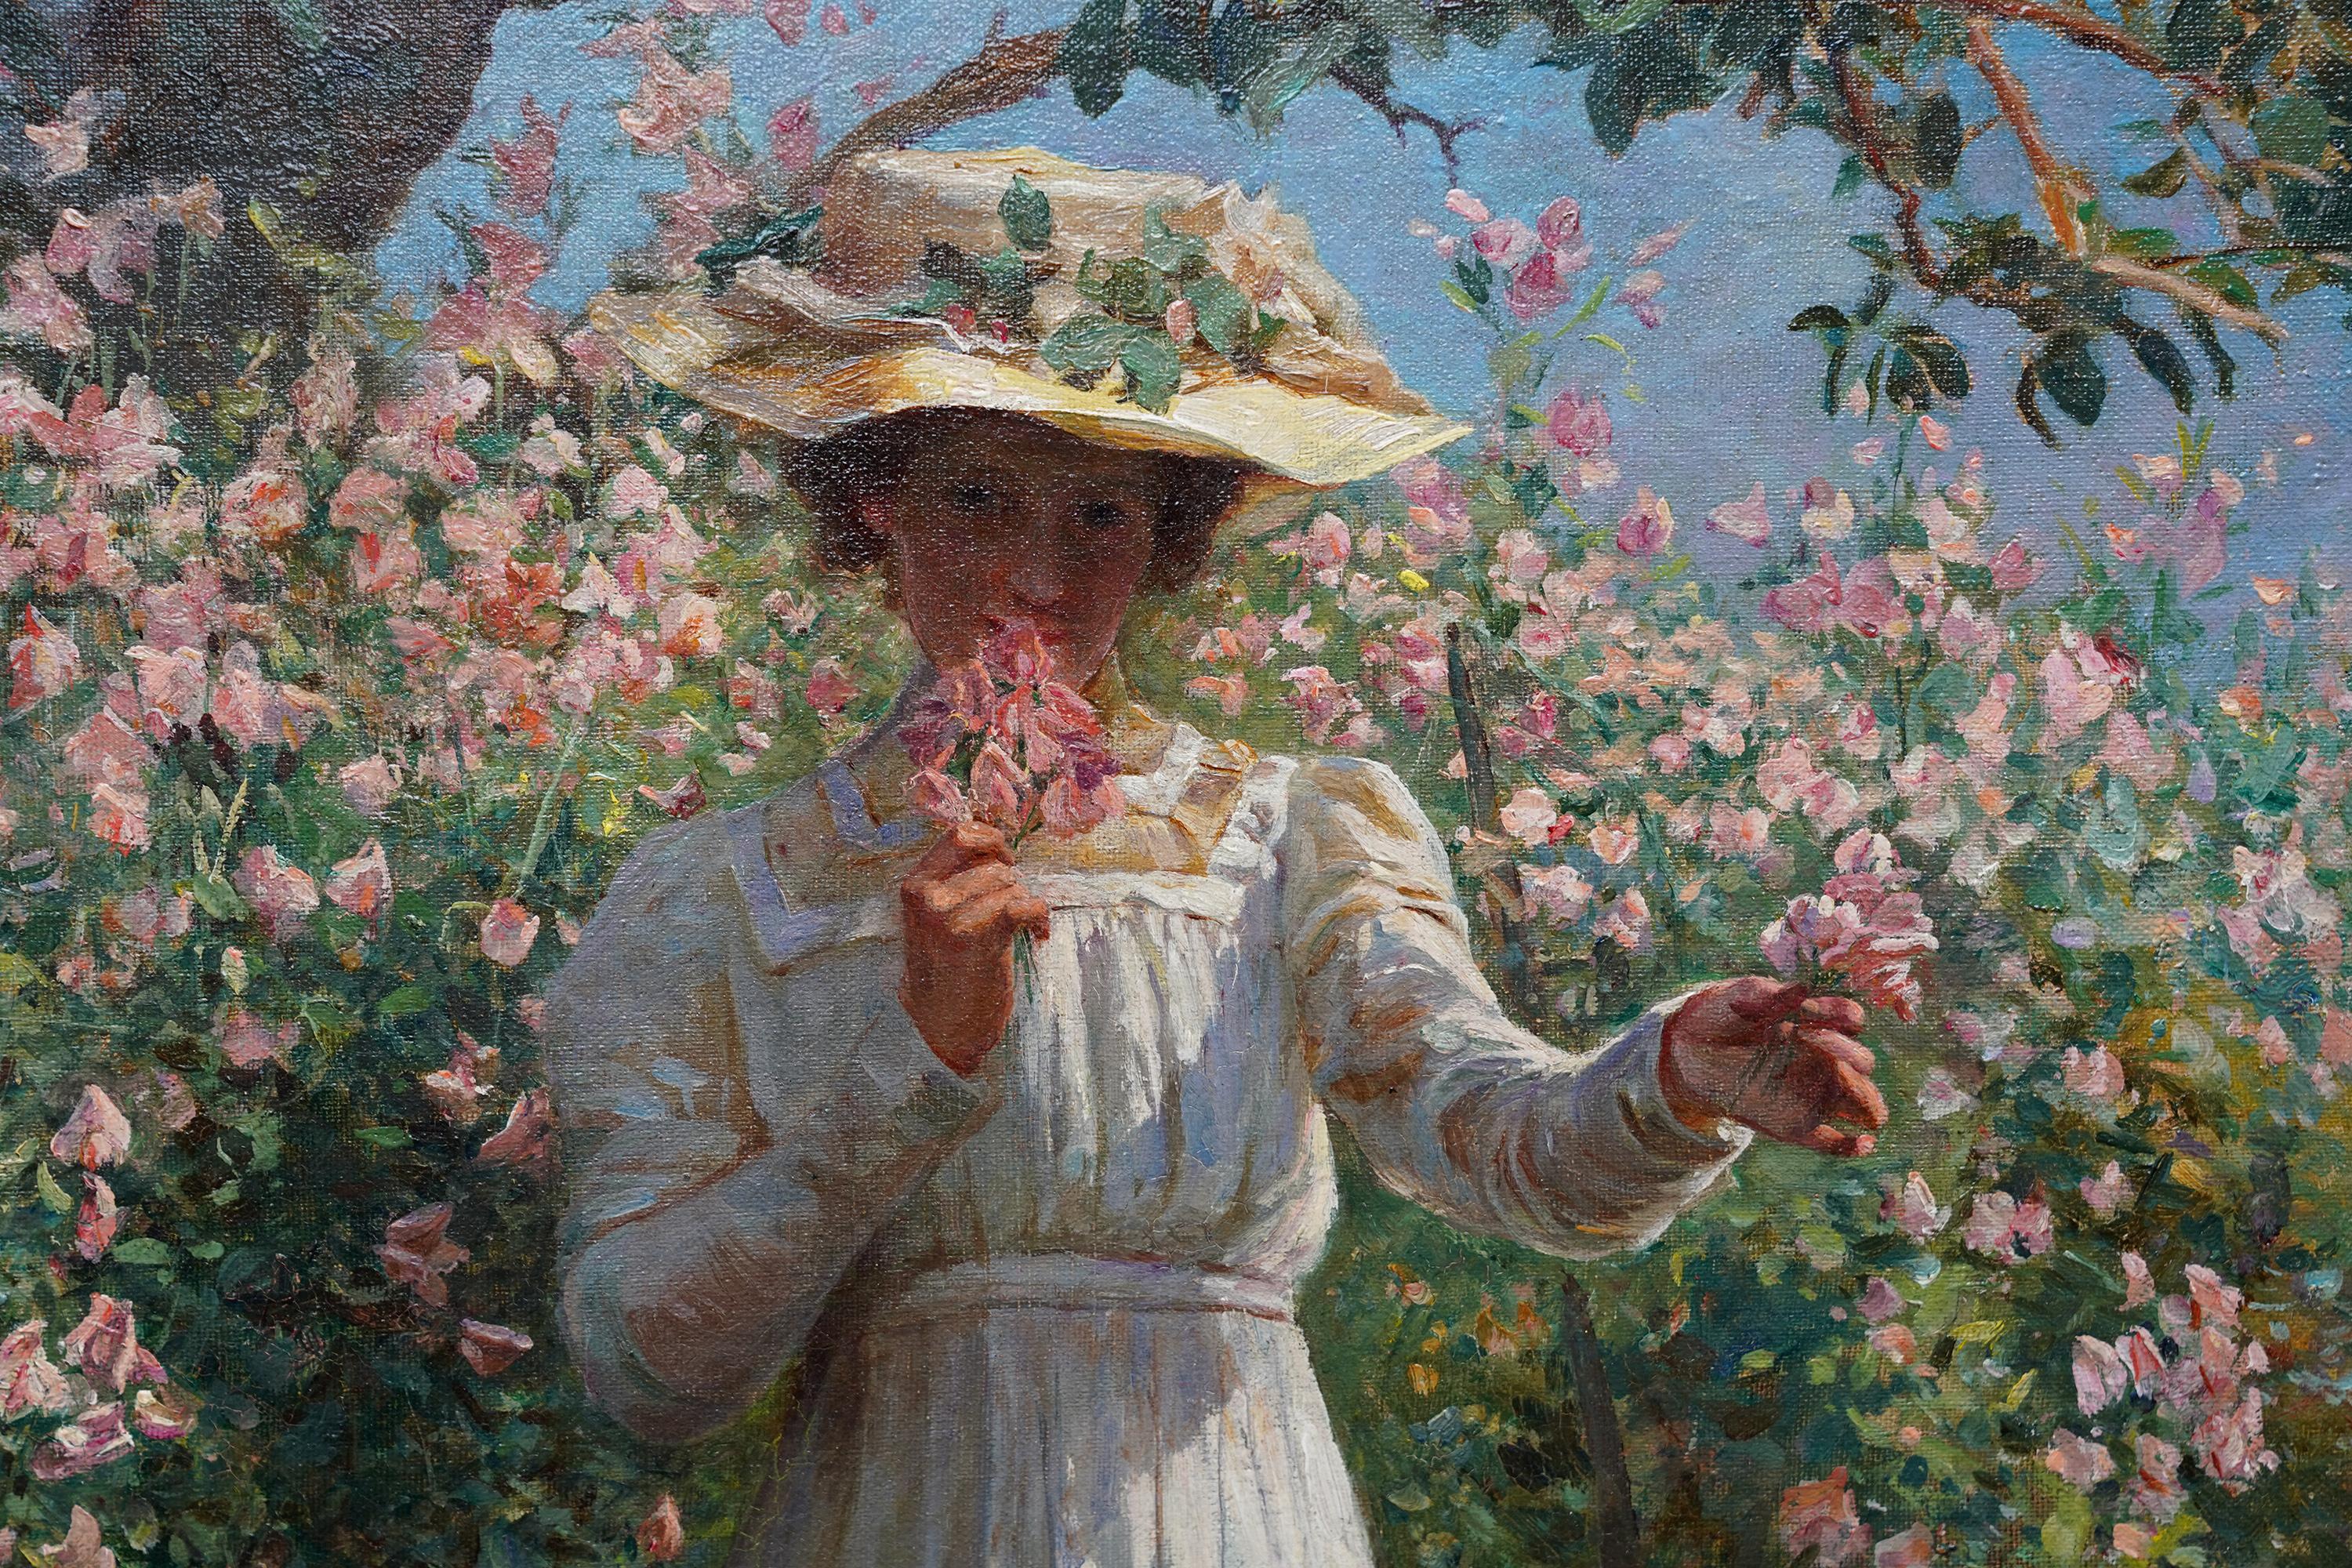 Portrait of a Lady with Sweet Peas - Scottish Edwardian exhib art oil painting - Victorian Painting by Robert Payton Reid